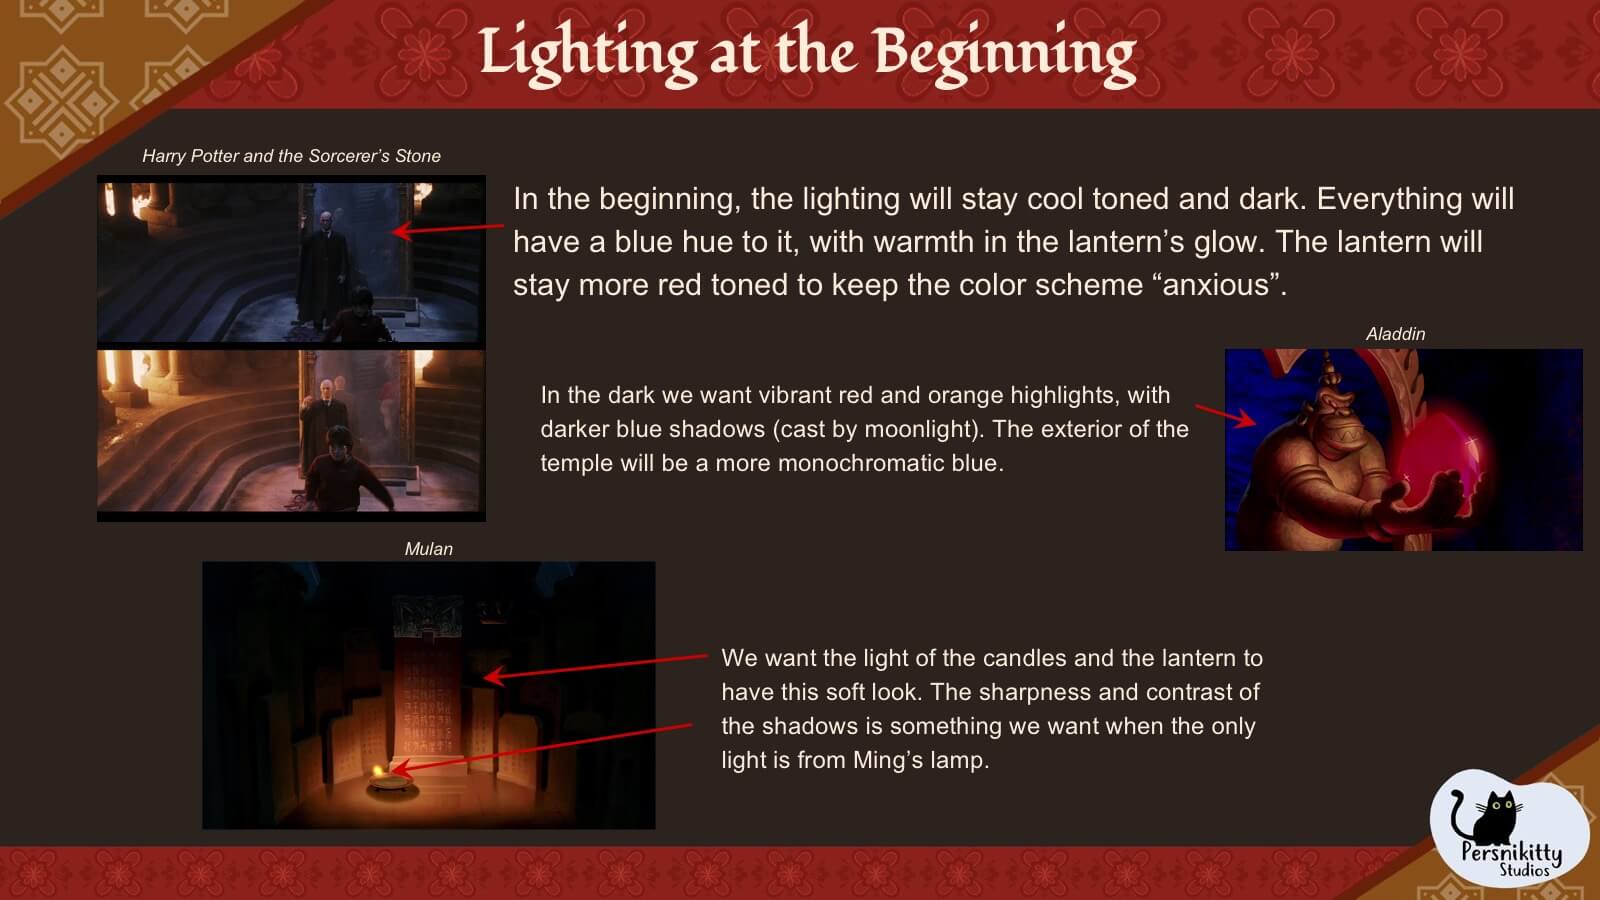 A slide displaying the visual references for lighting in the temple at the start of the film.